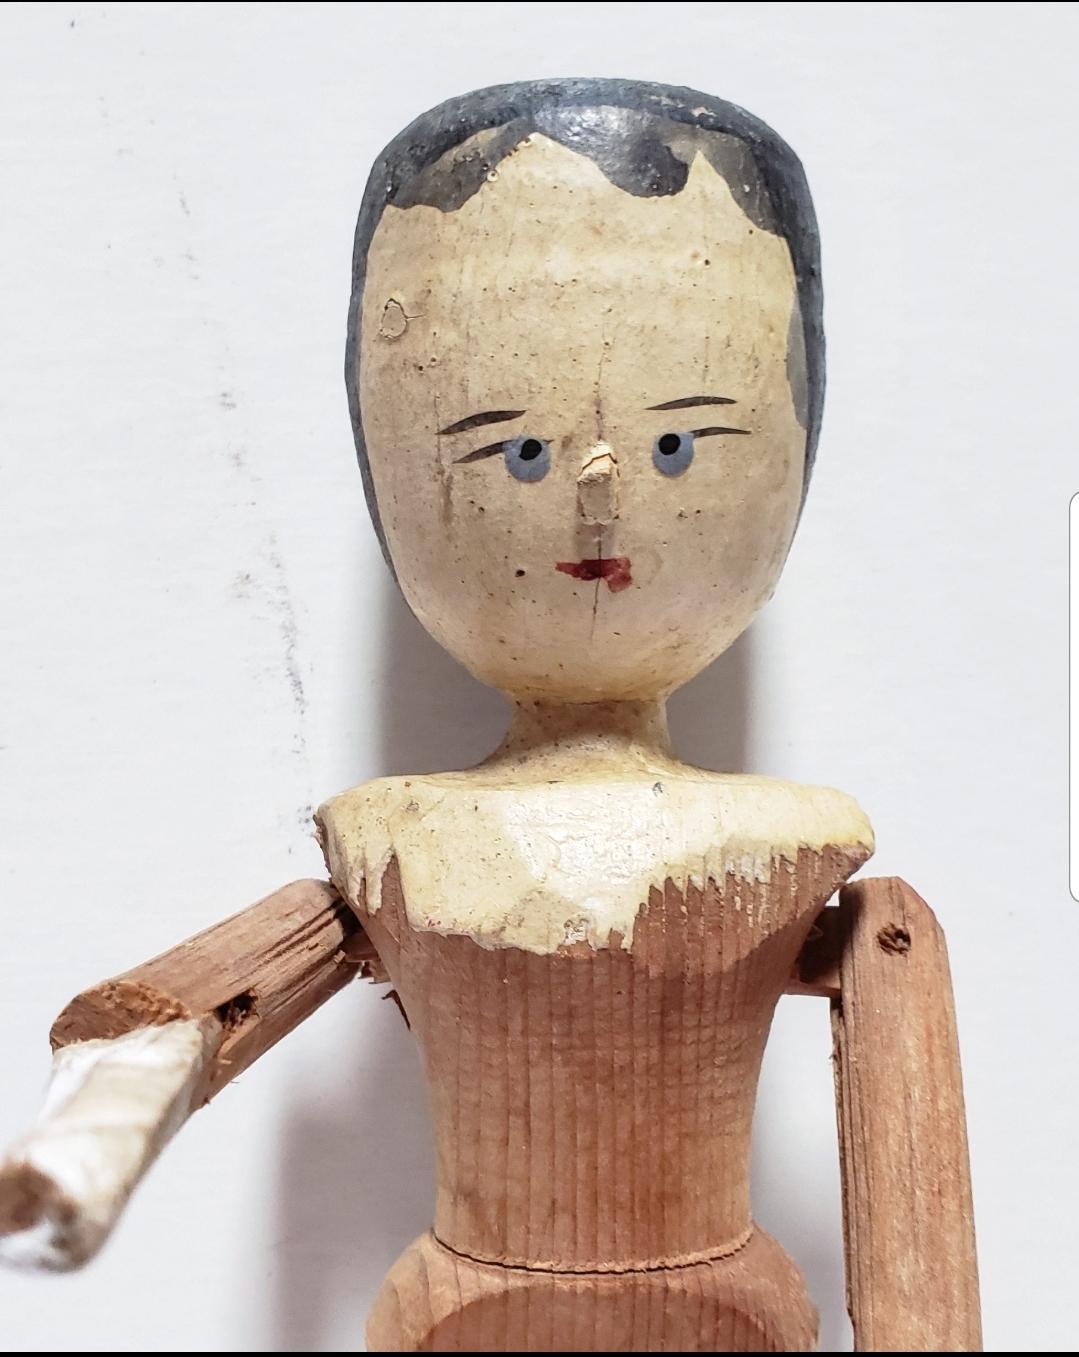 The English call these crudely hand-carved dolls Penny Dolls. These dolls were cheap toys sold on the streets of cities and villages in the British isles from the late 17th century. Quickly carved from deal (pine), these distinctive dolls with their